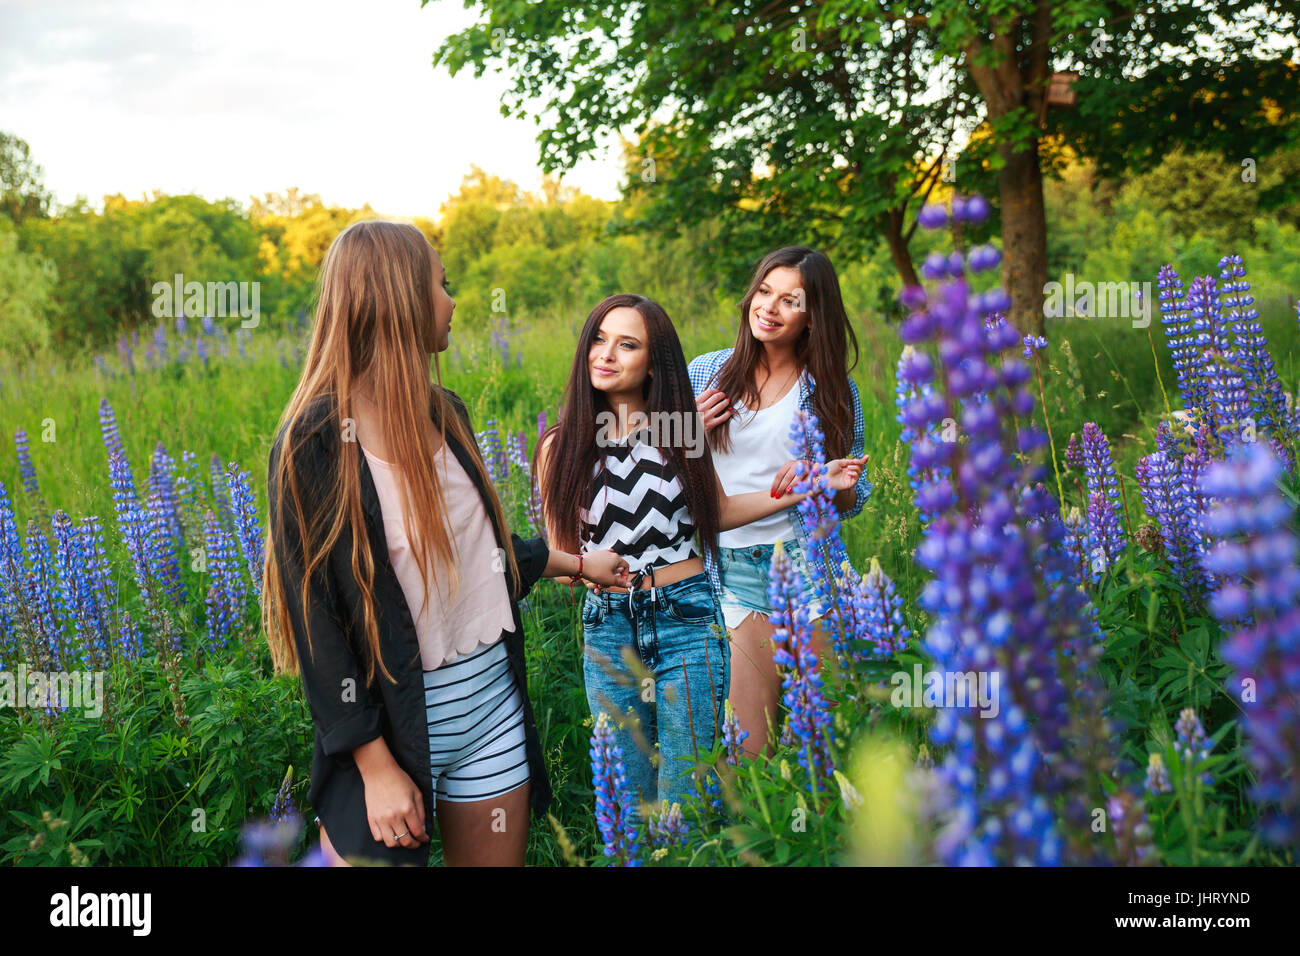 Portrait of happy smiling friends on weekend outdoor. Three beautiful young happy girls best friends having fun, smiling and laughing. Stock Photo